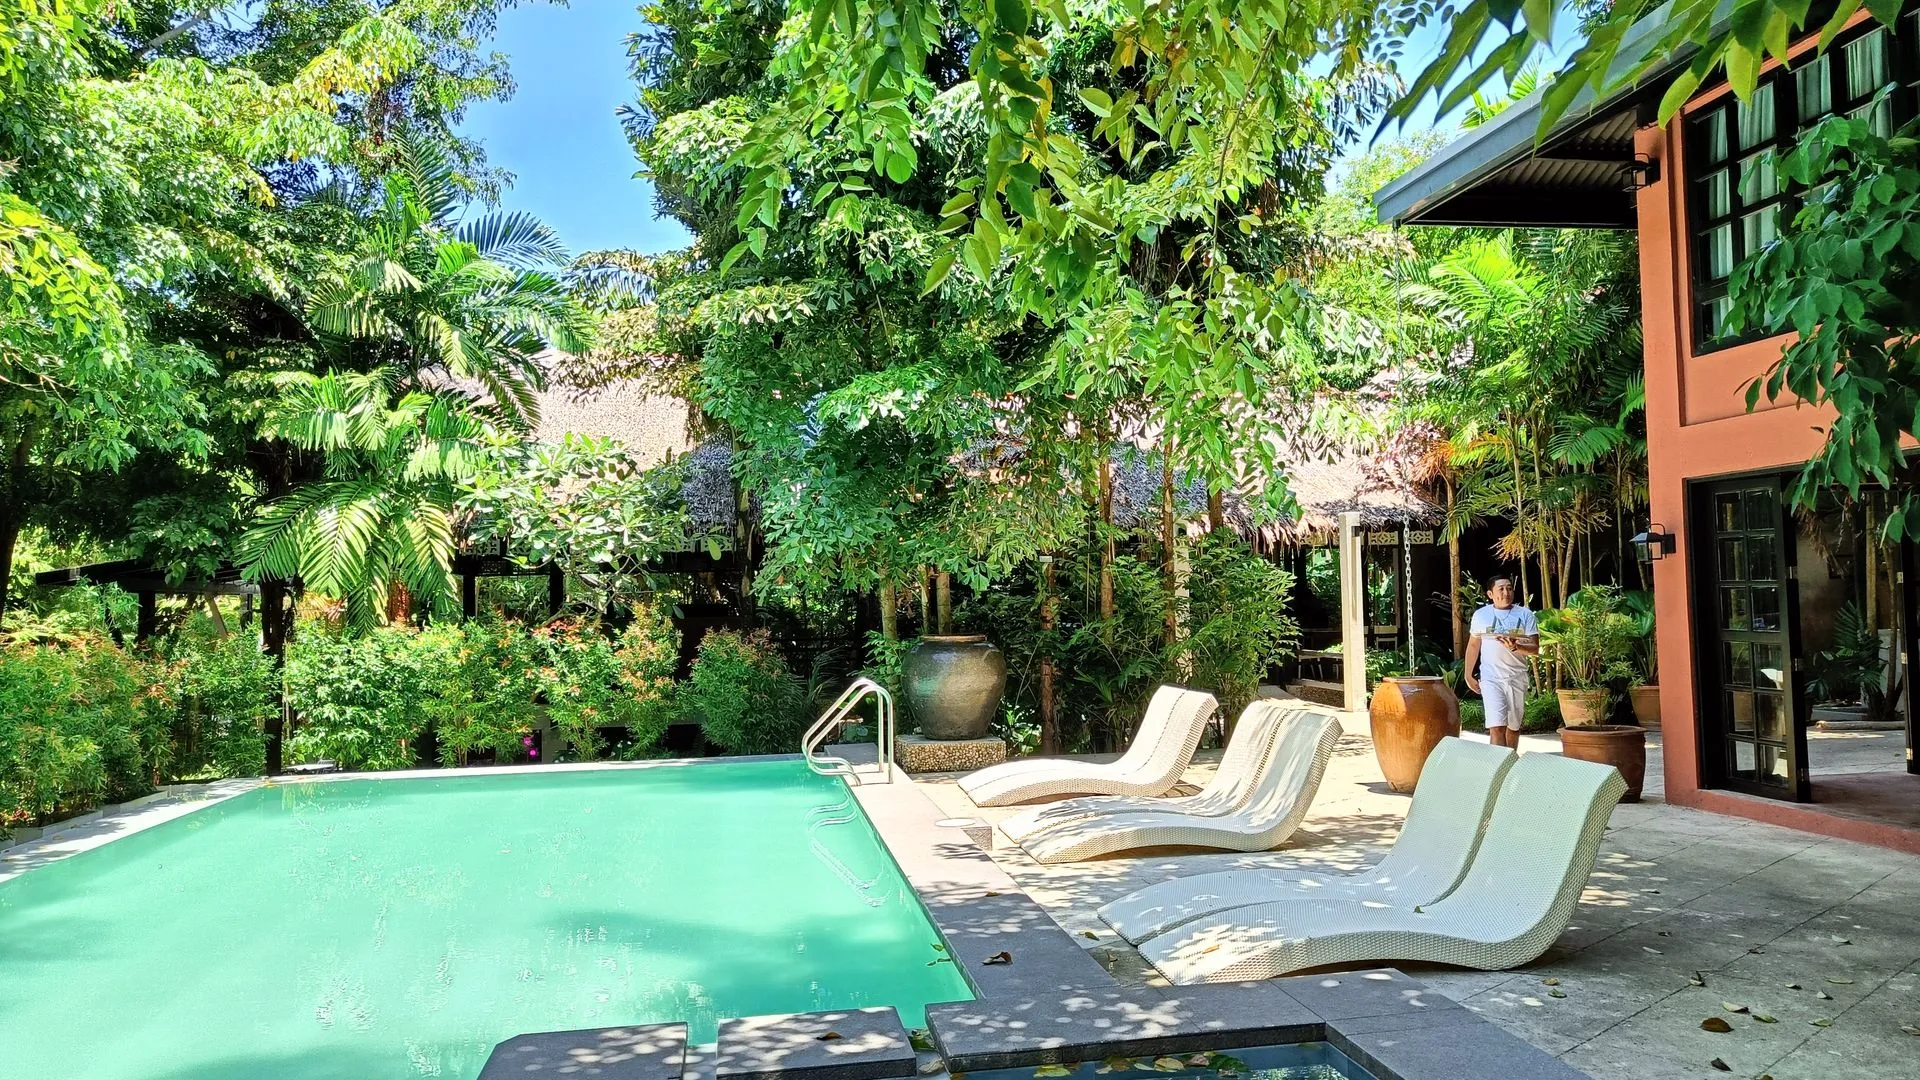 Lush poolside view at The Henry Resort Boracay, a boutique hotel in Boracay, featuring vibrant greenery, modern sun loungers, and a tranquil swimming pool adjacent to a rustic style building.